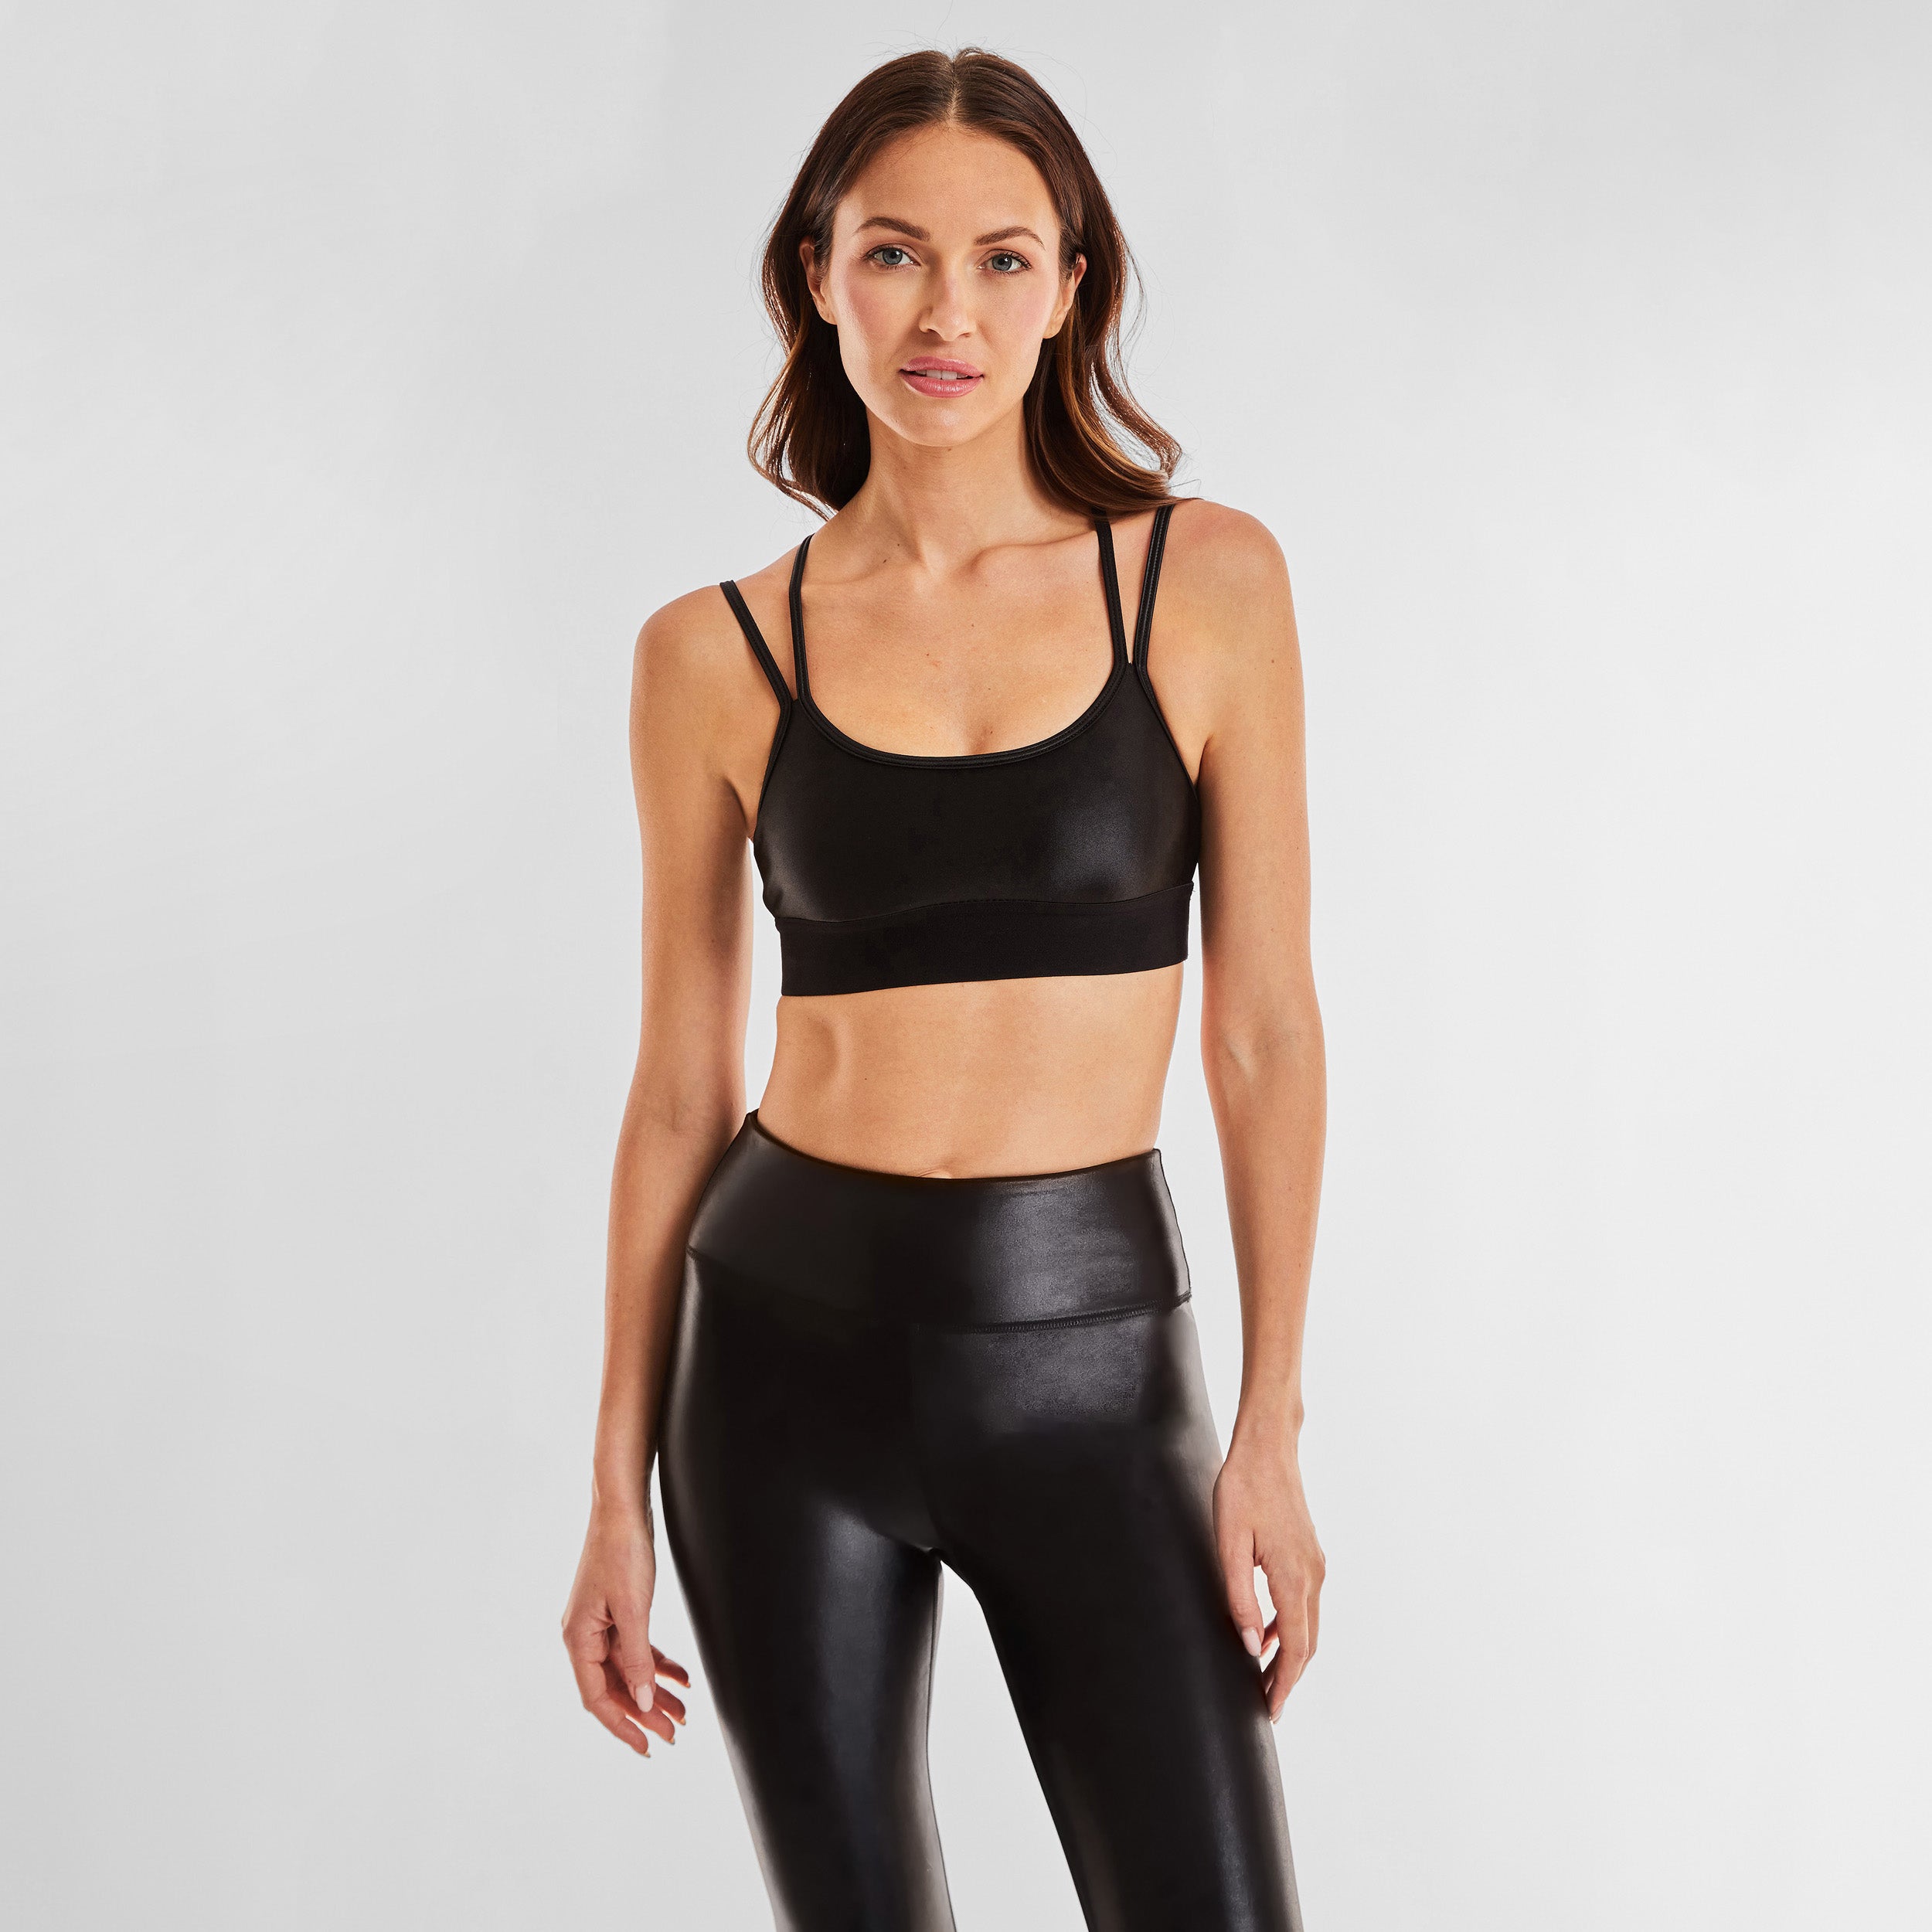 Front view of woman wearing black gloss liquid sports bra featuring a scoop neckline and an alluring strappy back with a supportive elastic band